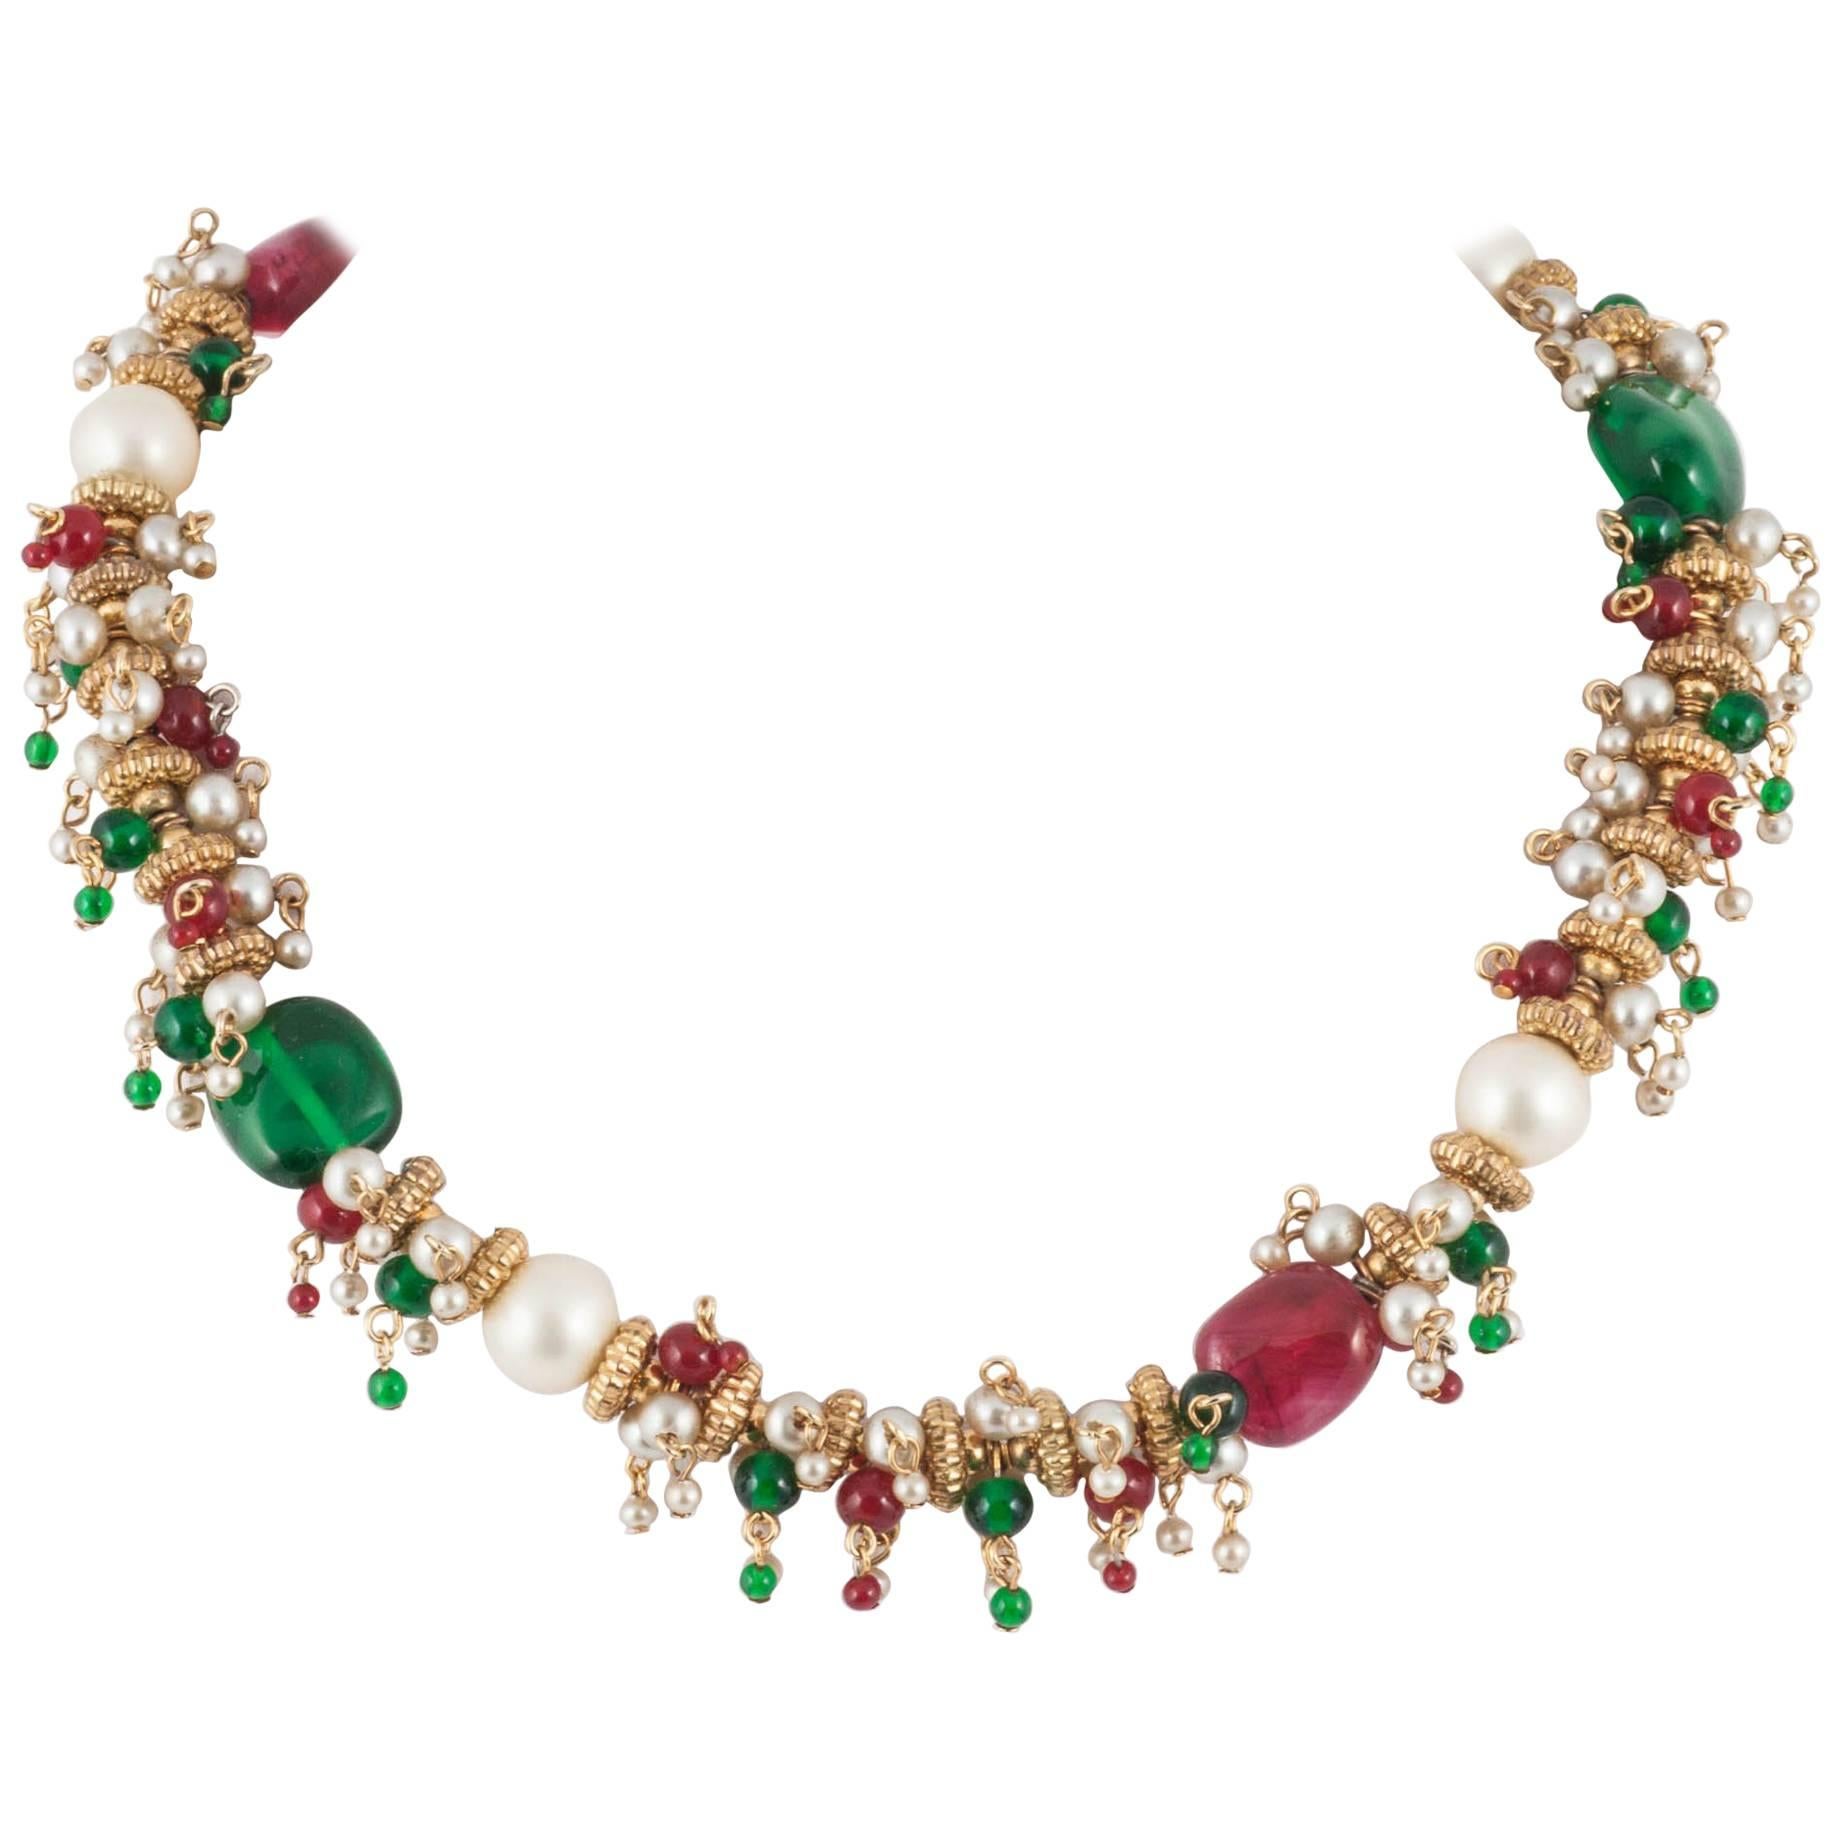 An exquisite handmade Moghul style necklace, Maison Gripoix for Chanel, 1960s. For Sale